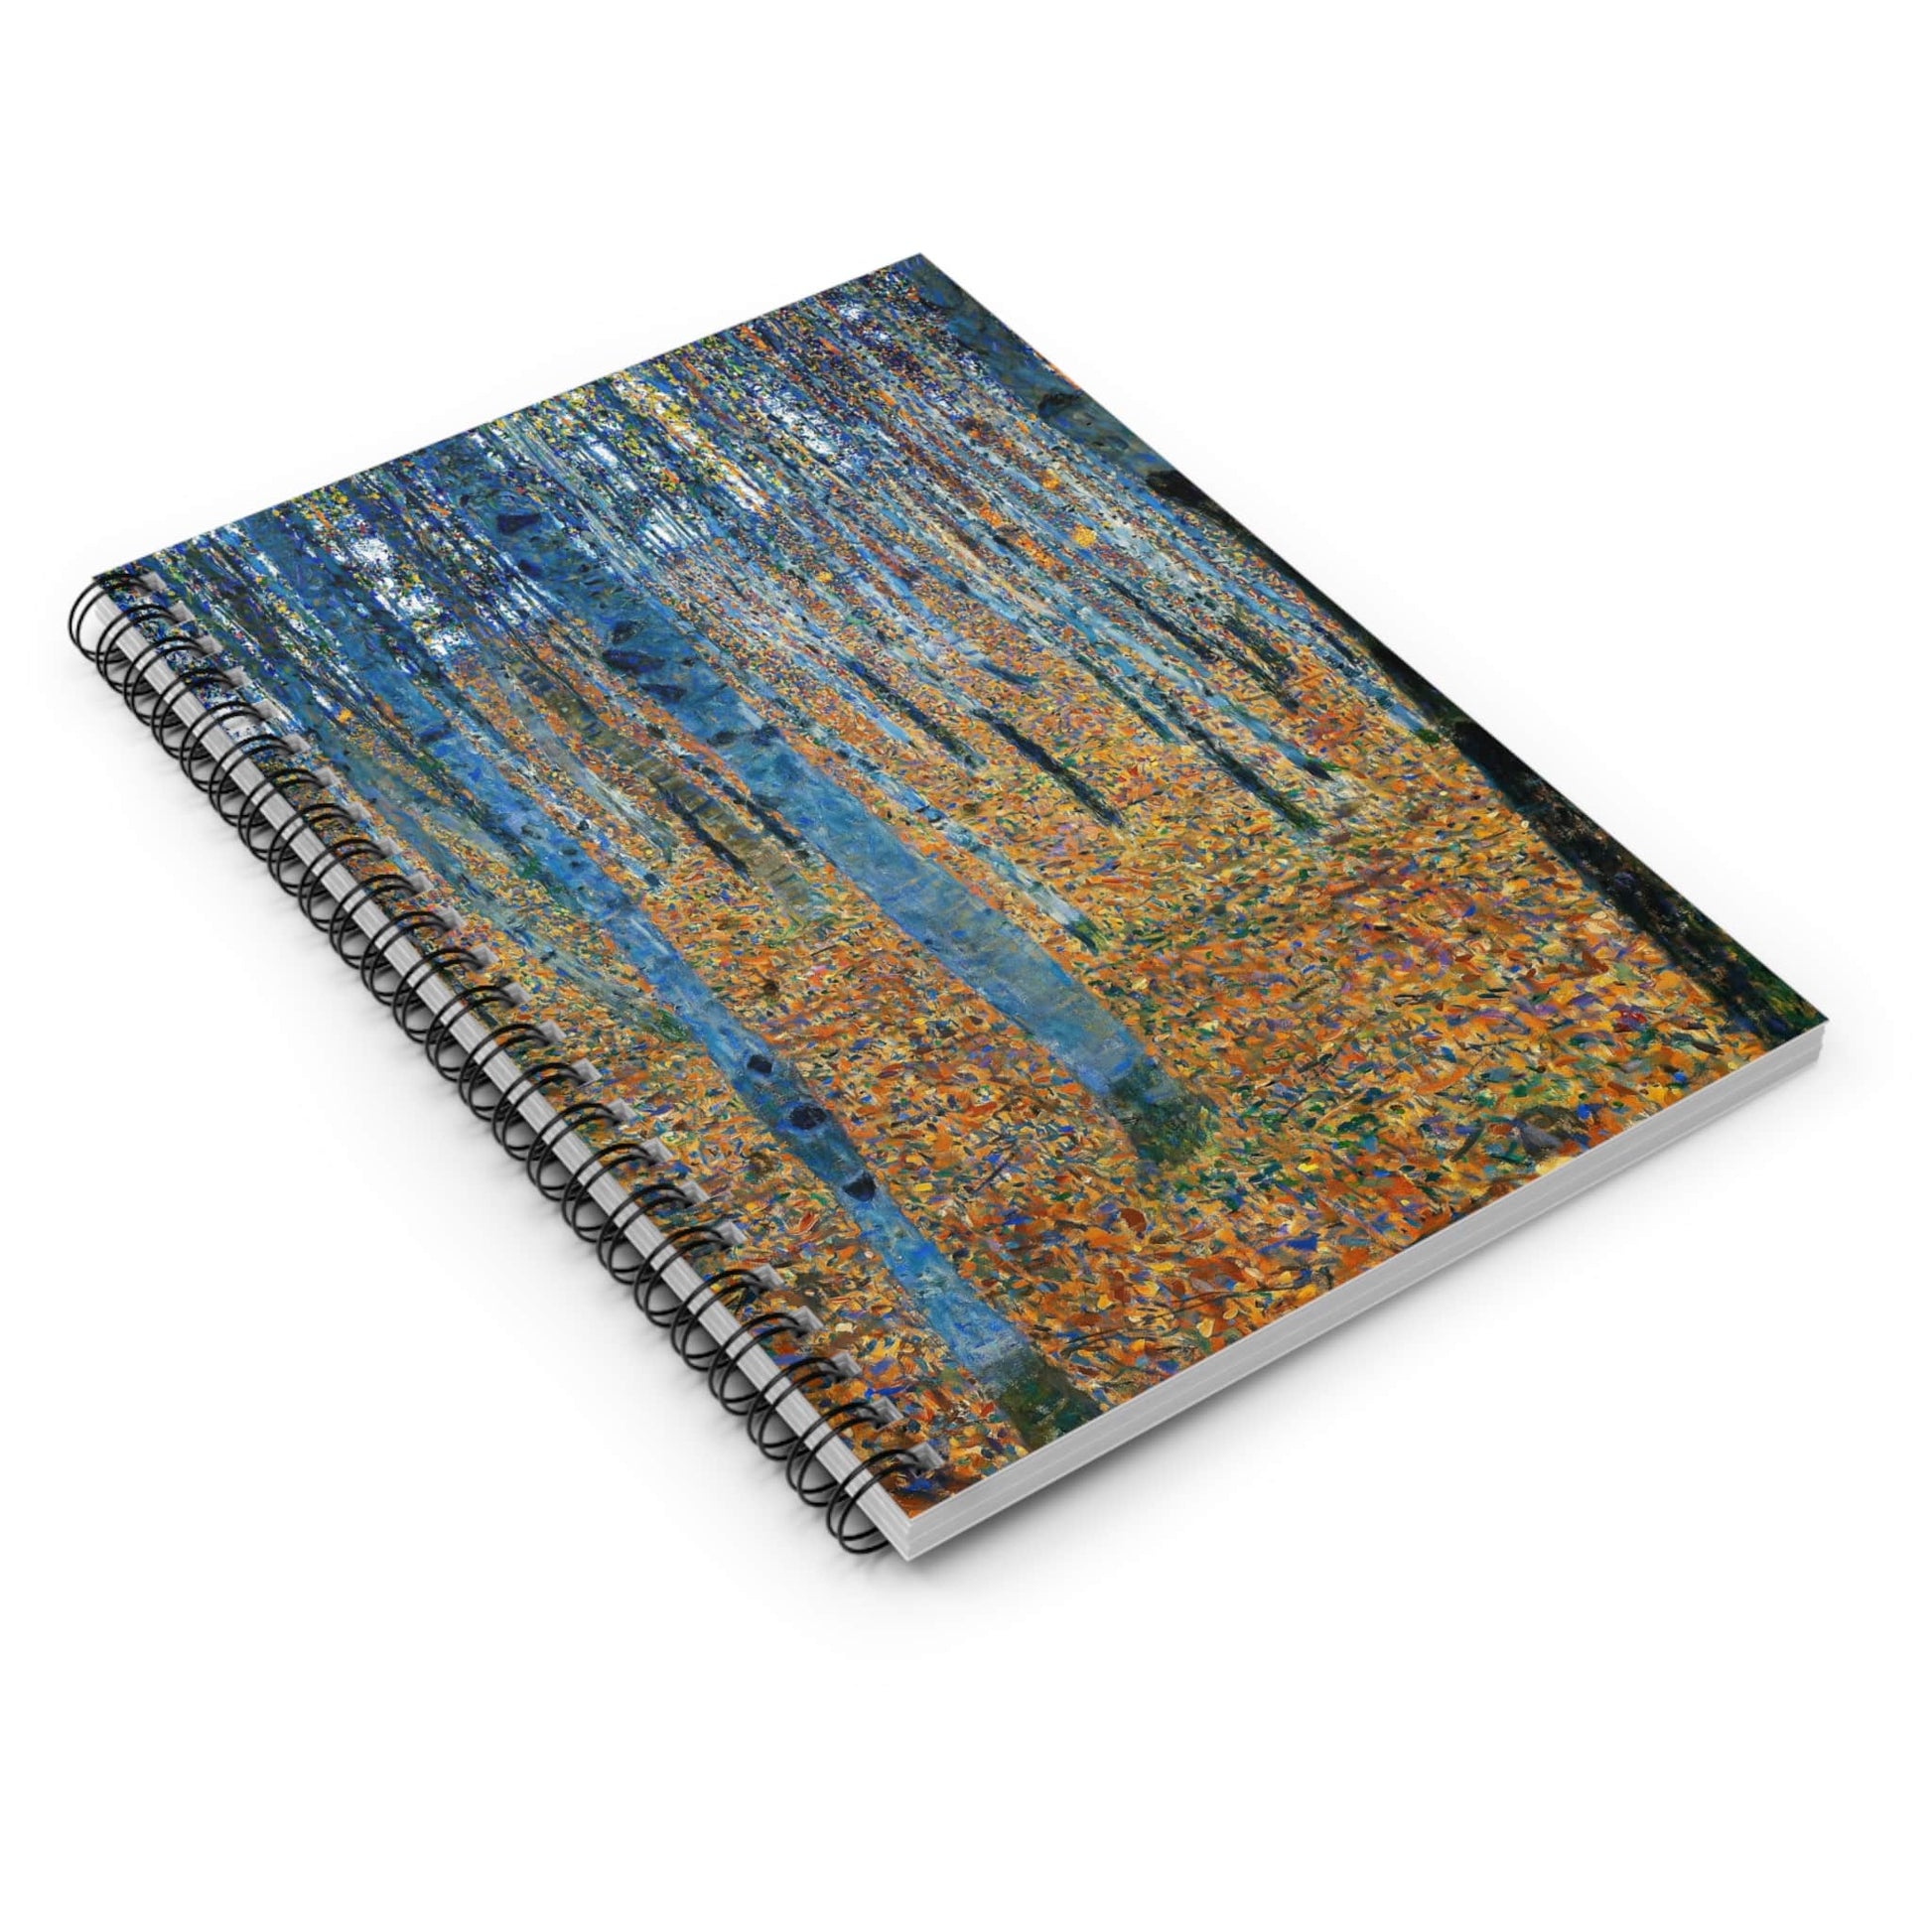 Nature Spiral Notebook Laying Flat on White Surface